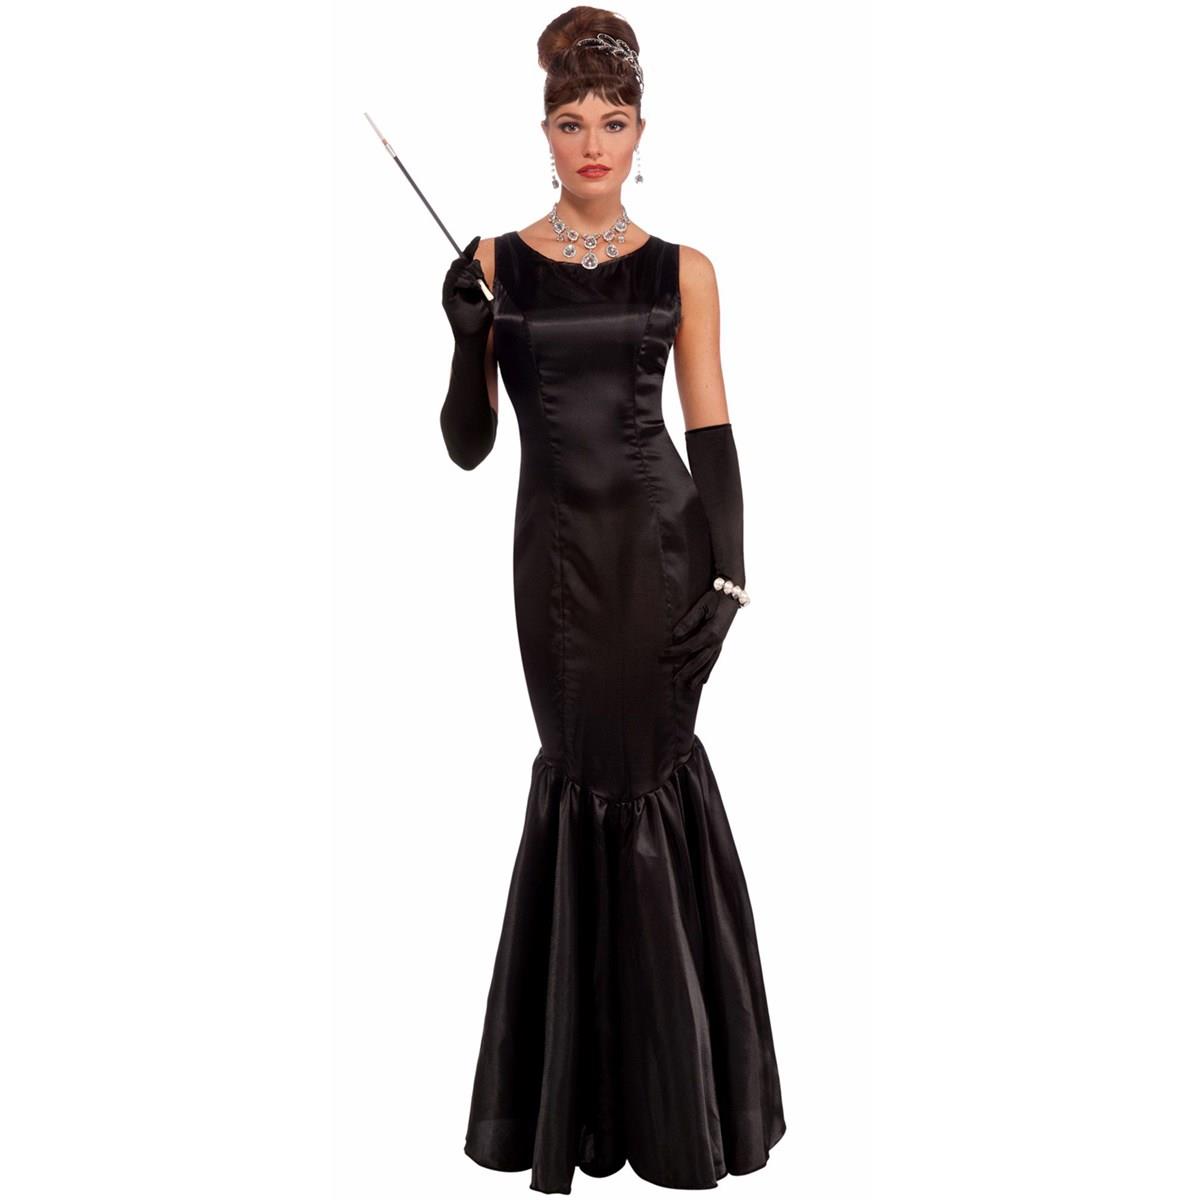 270719 Womens Vintage Hollywood High Society Adult Costume - One Size